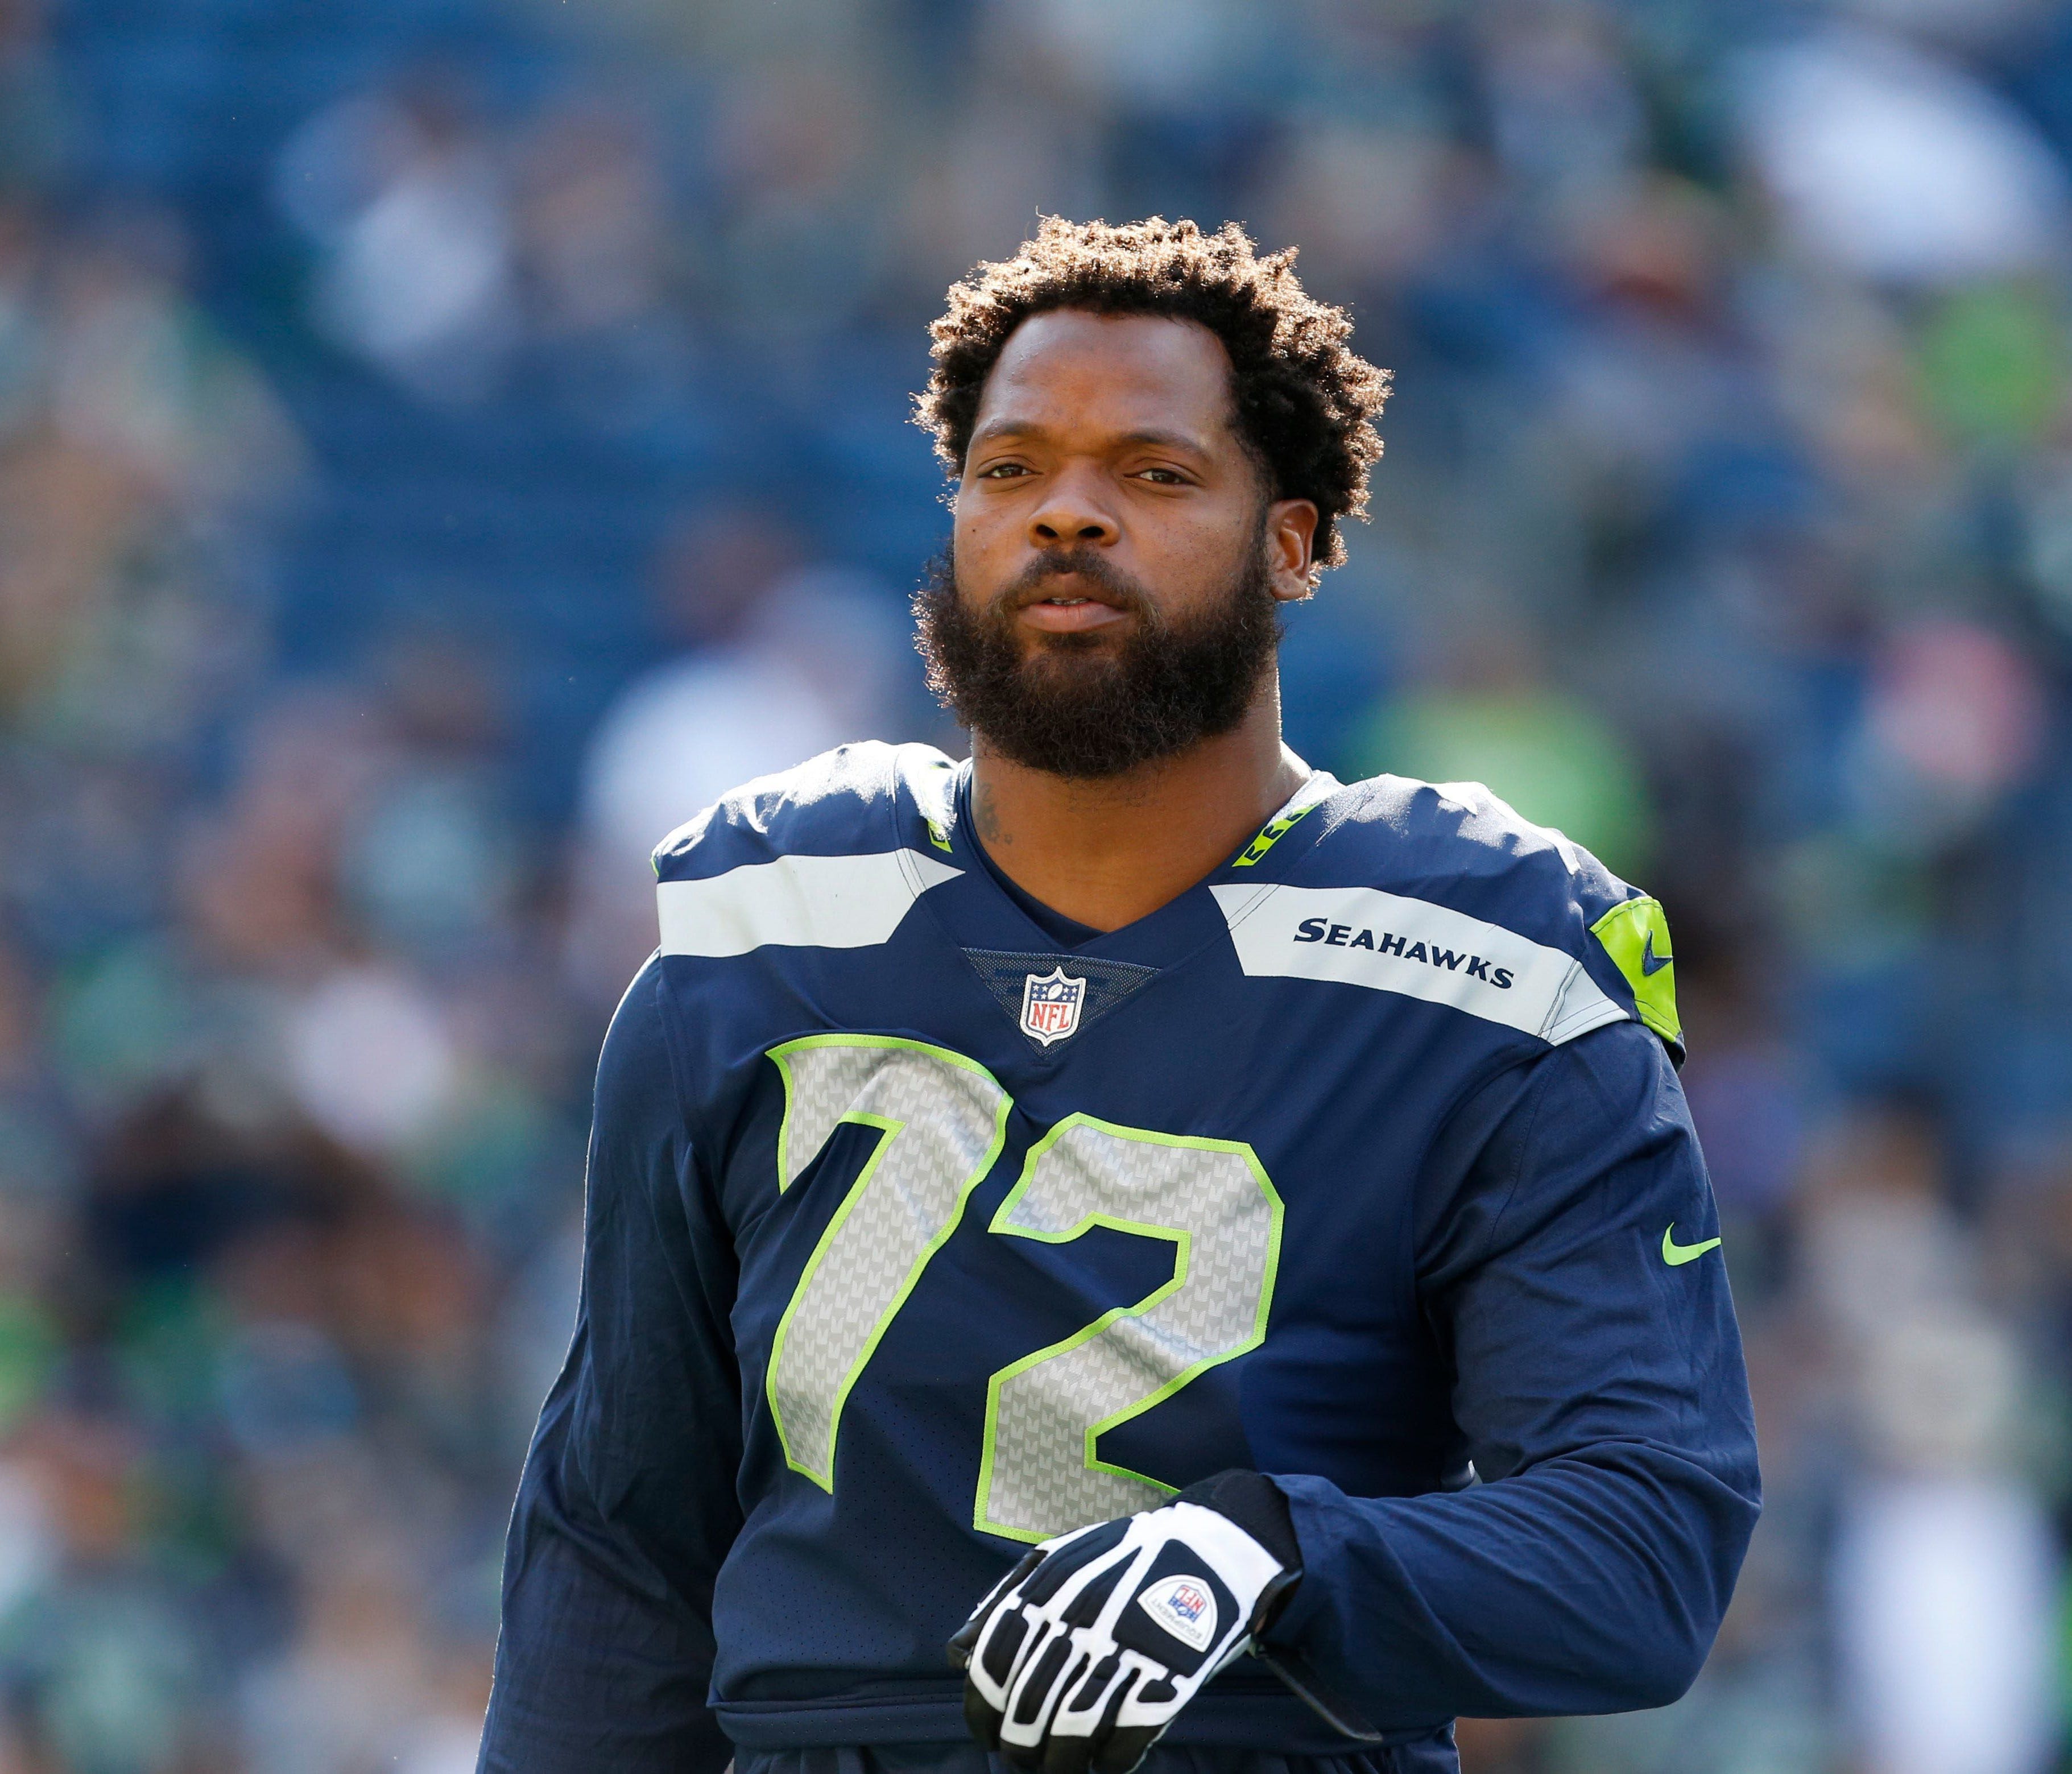 Michael Bennett took to social media on Wednesday to detail how he alleges he was mistreated by police in Las Vegas last month.